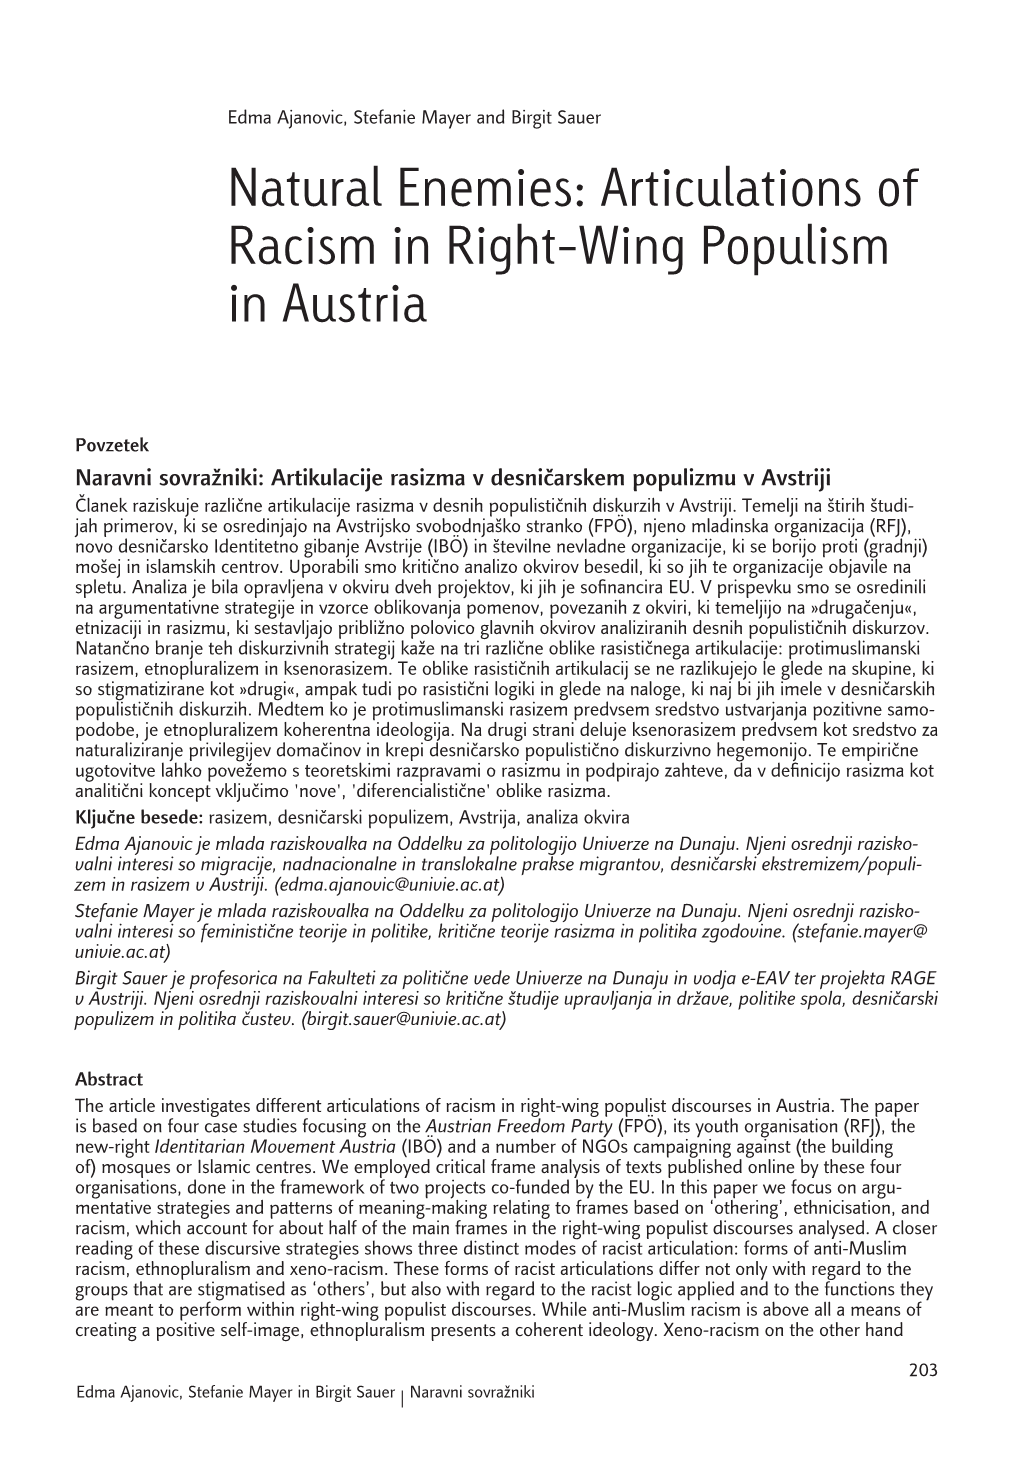 Articulations of Racism in Right-Wing Populism in Austria